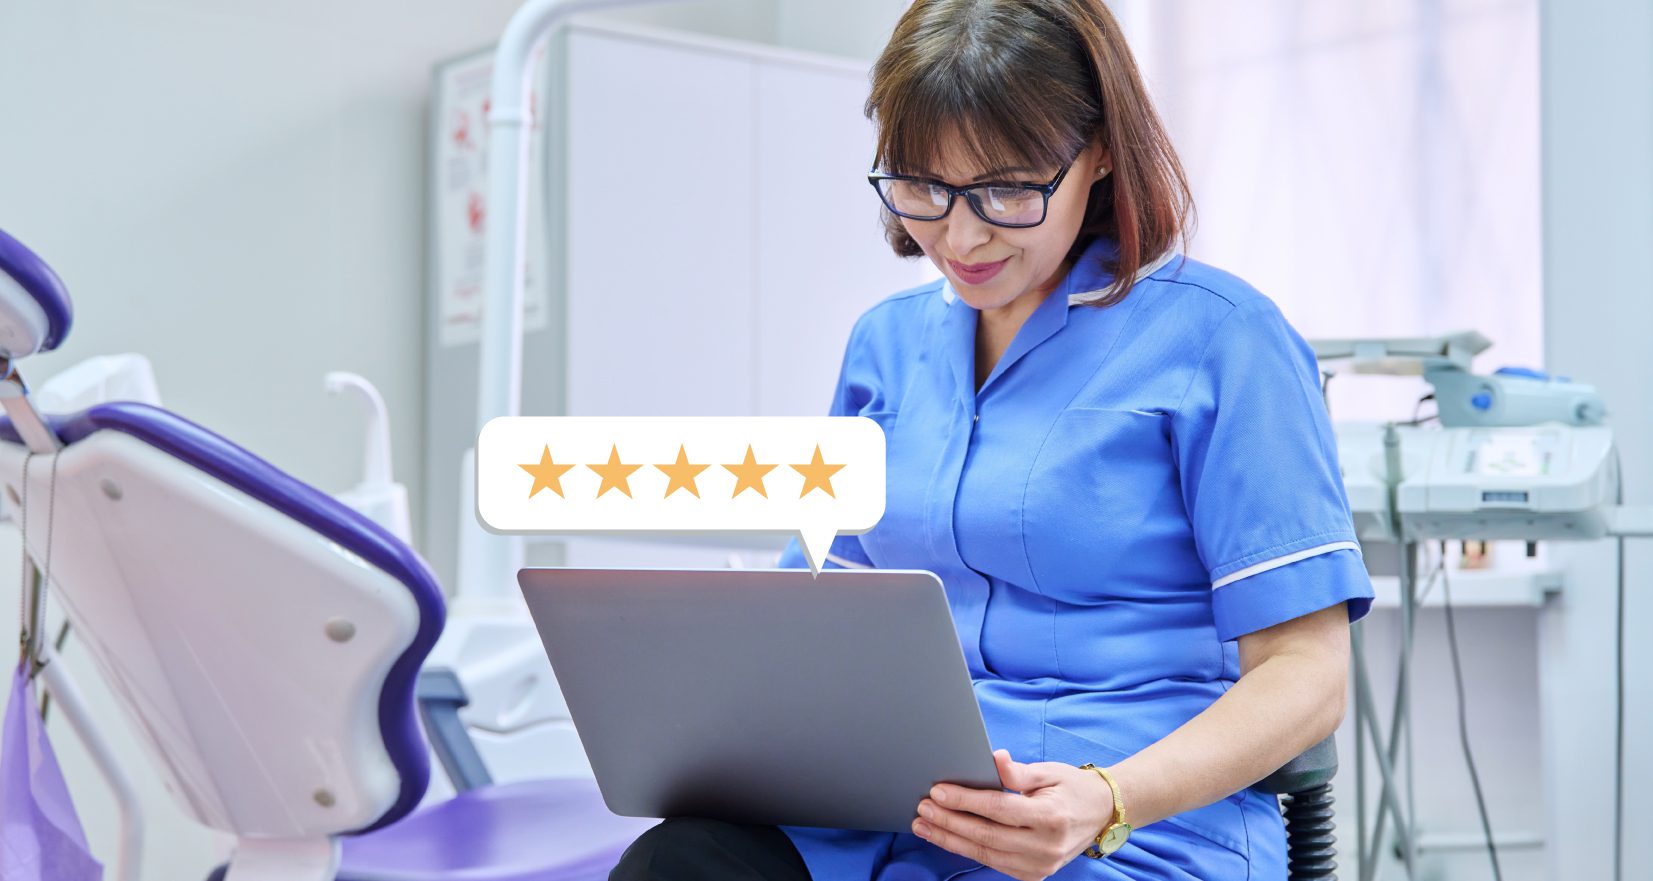 My Social Practice - Social Media Marketing for Dental & Dental Specialty Practices - how to get more google reviews